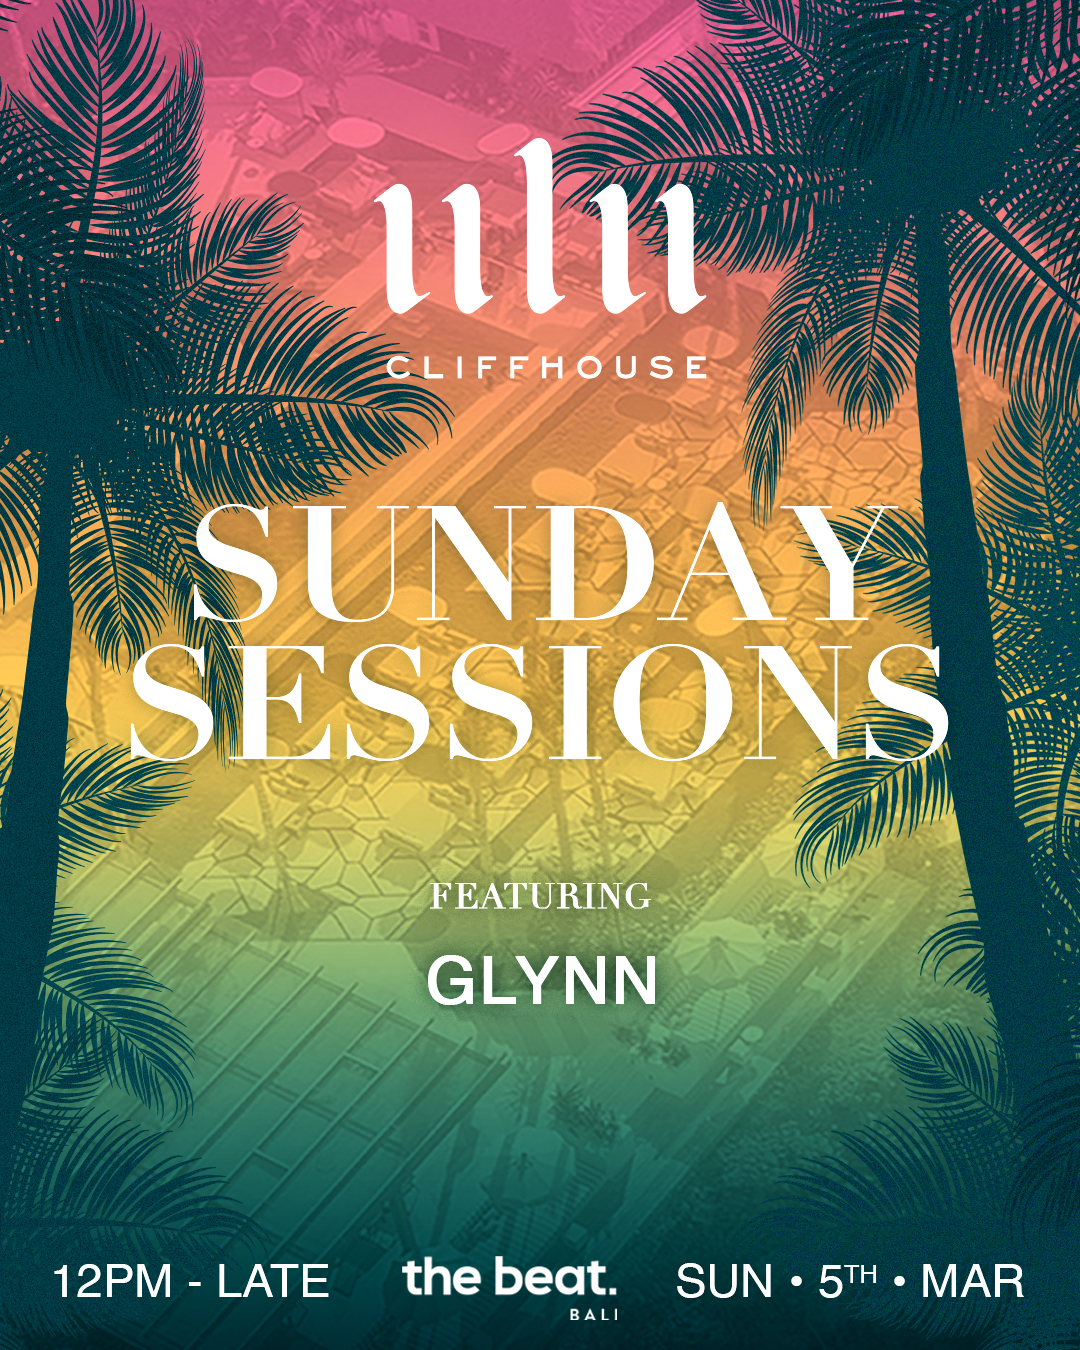 SUNDAY SESSIONS AT ULU CLIFFHOUSE – MARCH 5TH thumbnail image